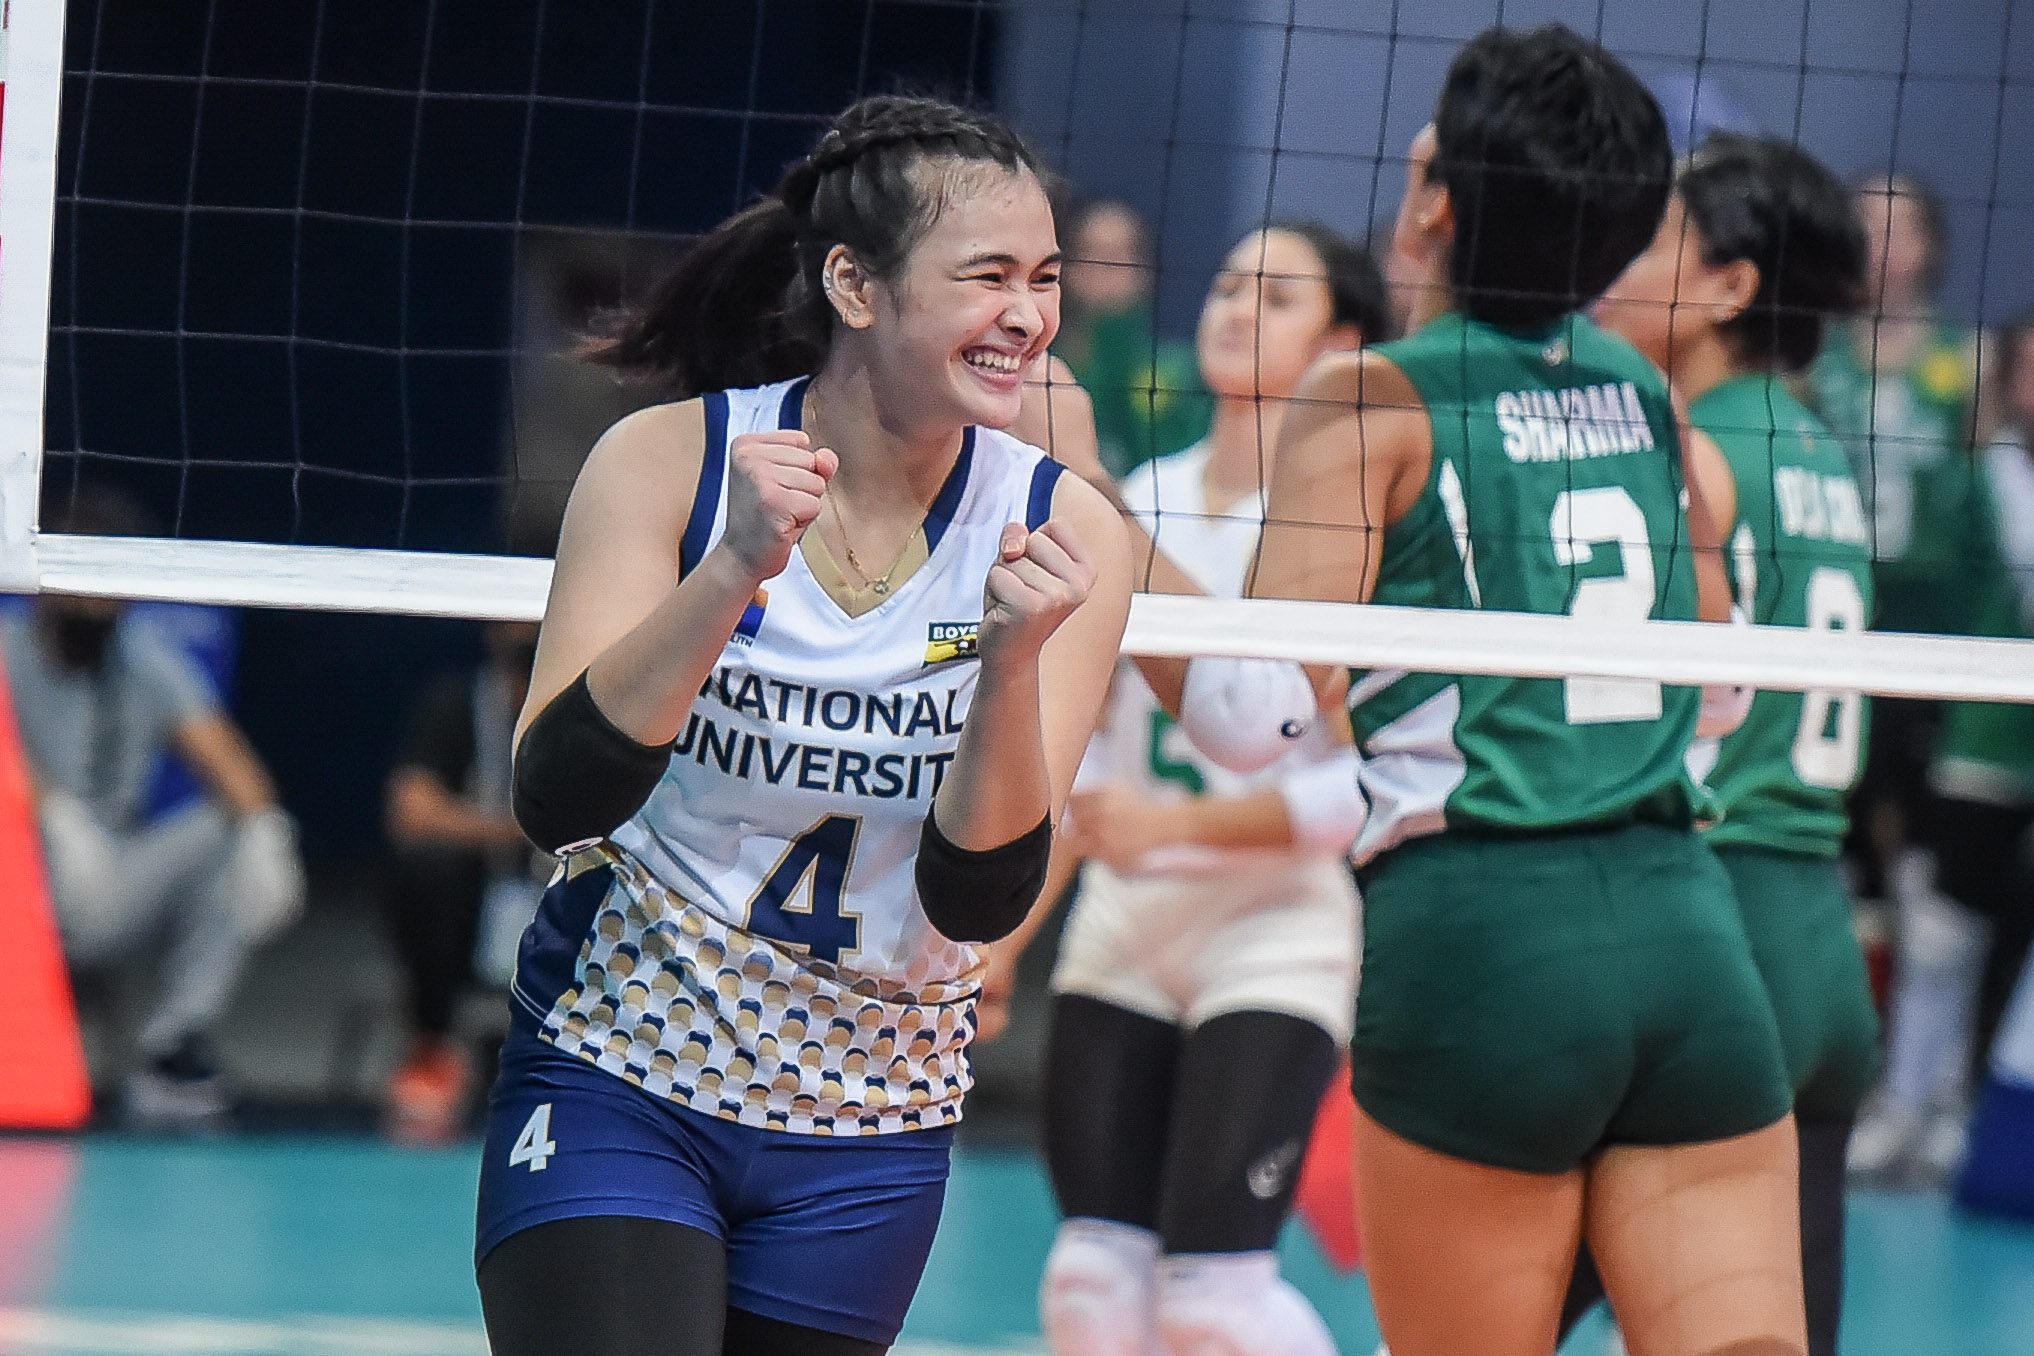 Locked in: NU star rookie Belen brushes off MVP chants as historic title nears